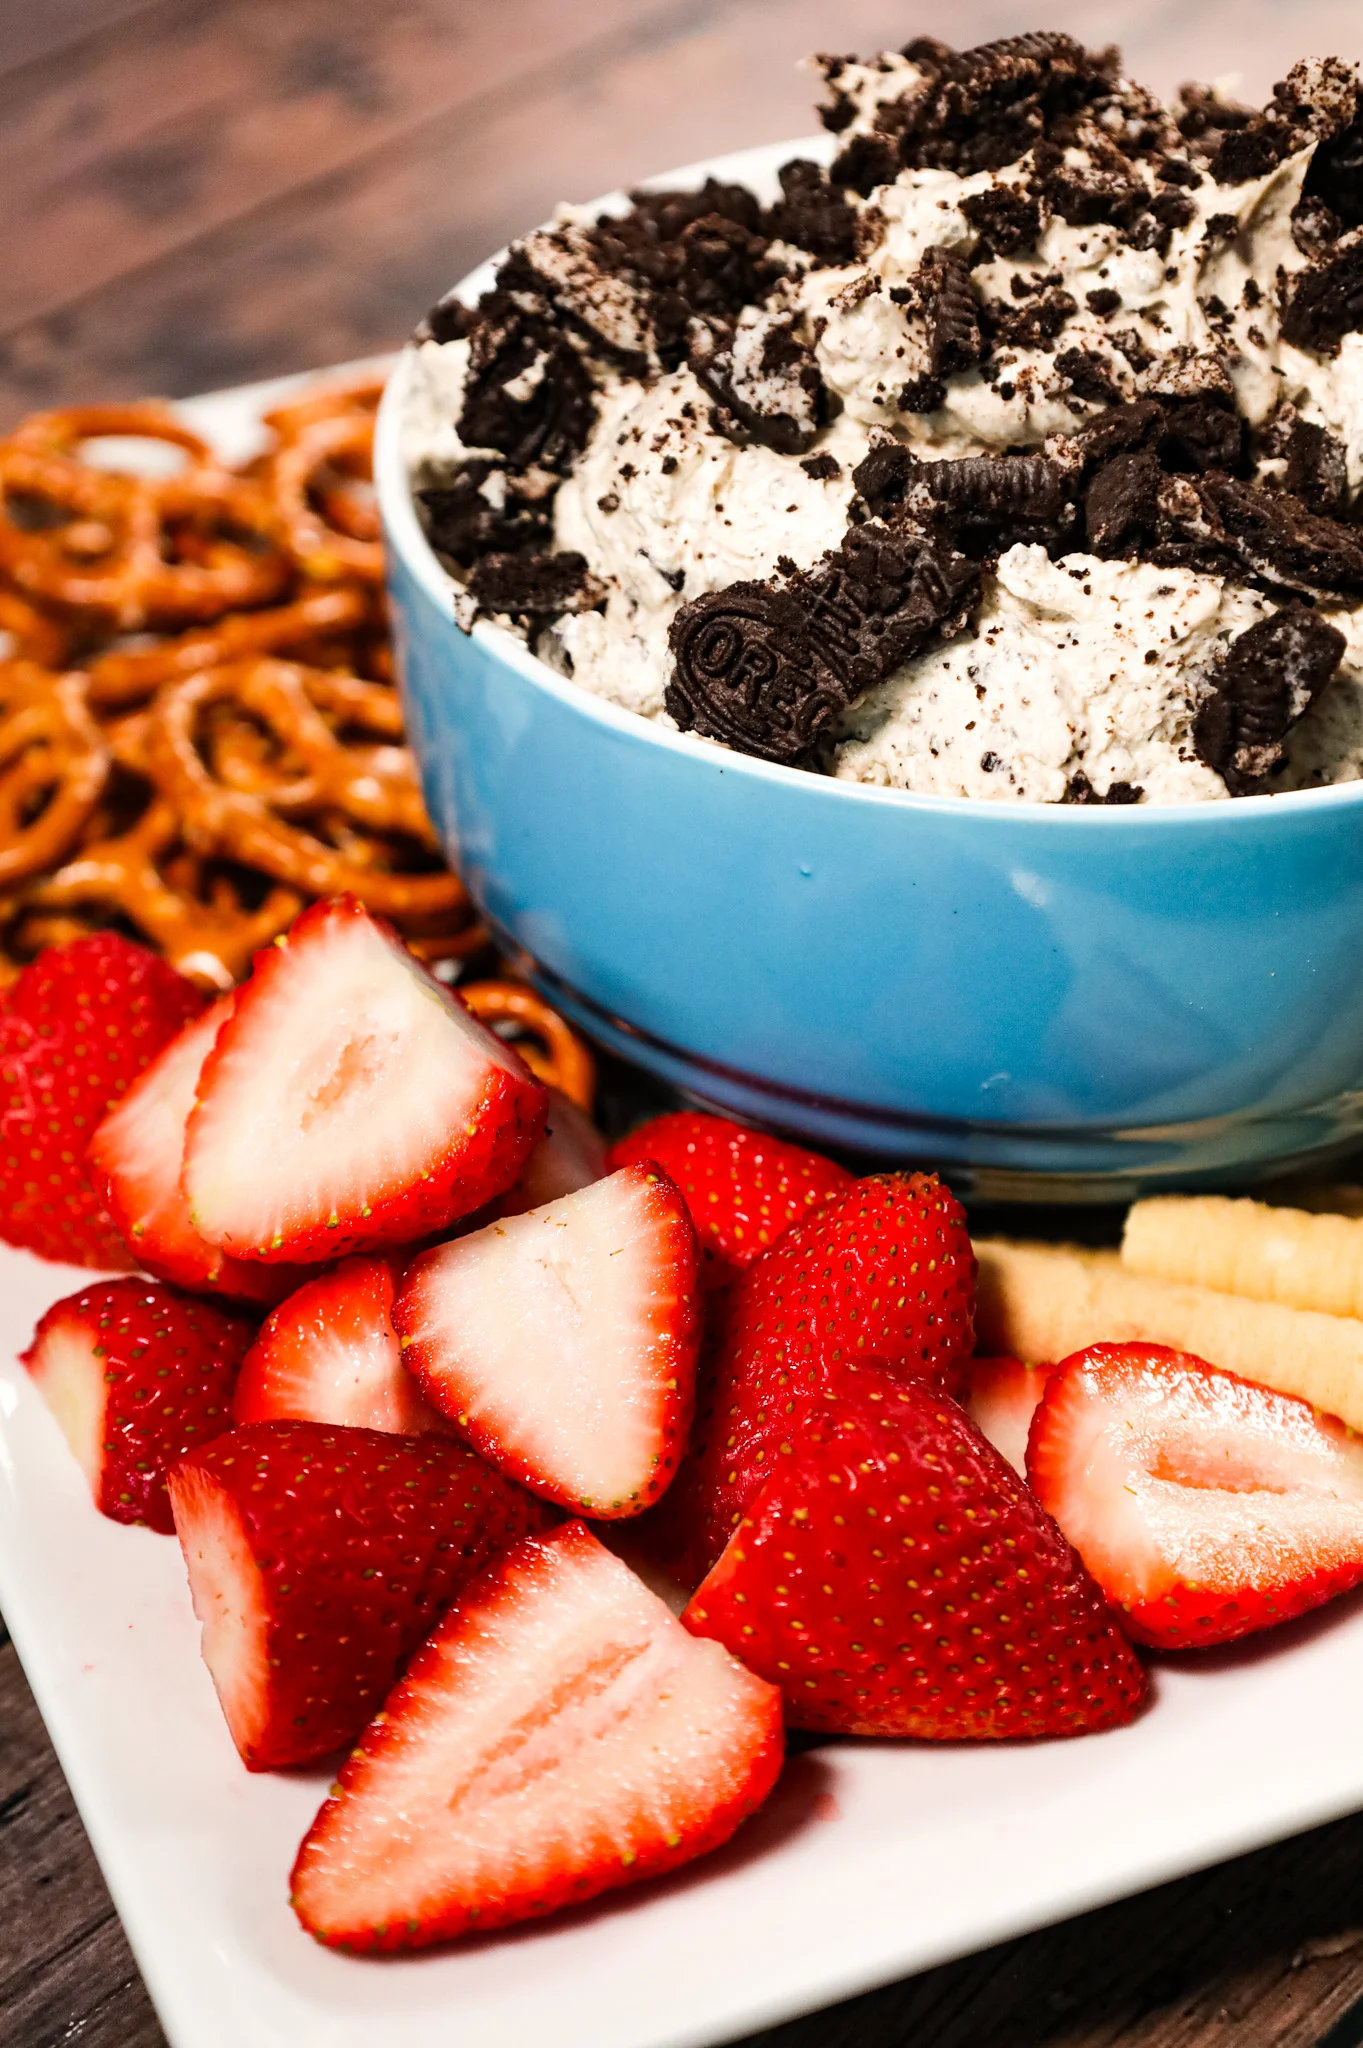 Oreo Dip is an easy no bake dessert recipe made with cream cheese, Cool Whip, powdered sugar and loaded with crumbled Oreo cookies.